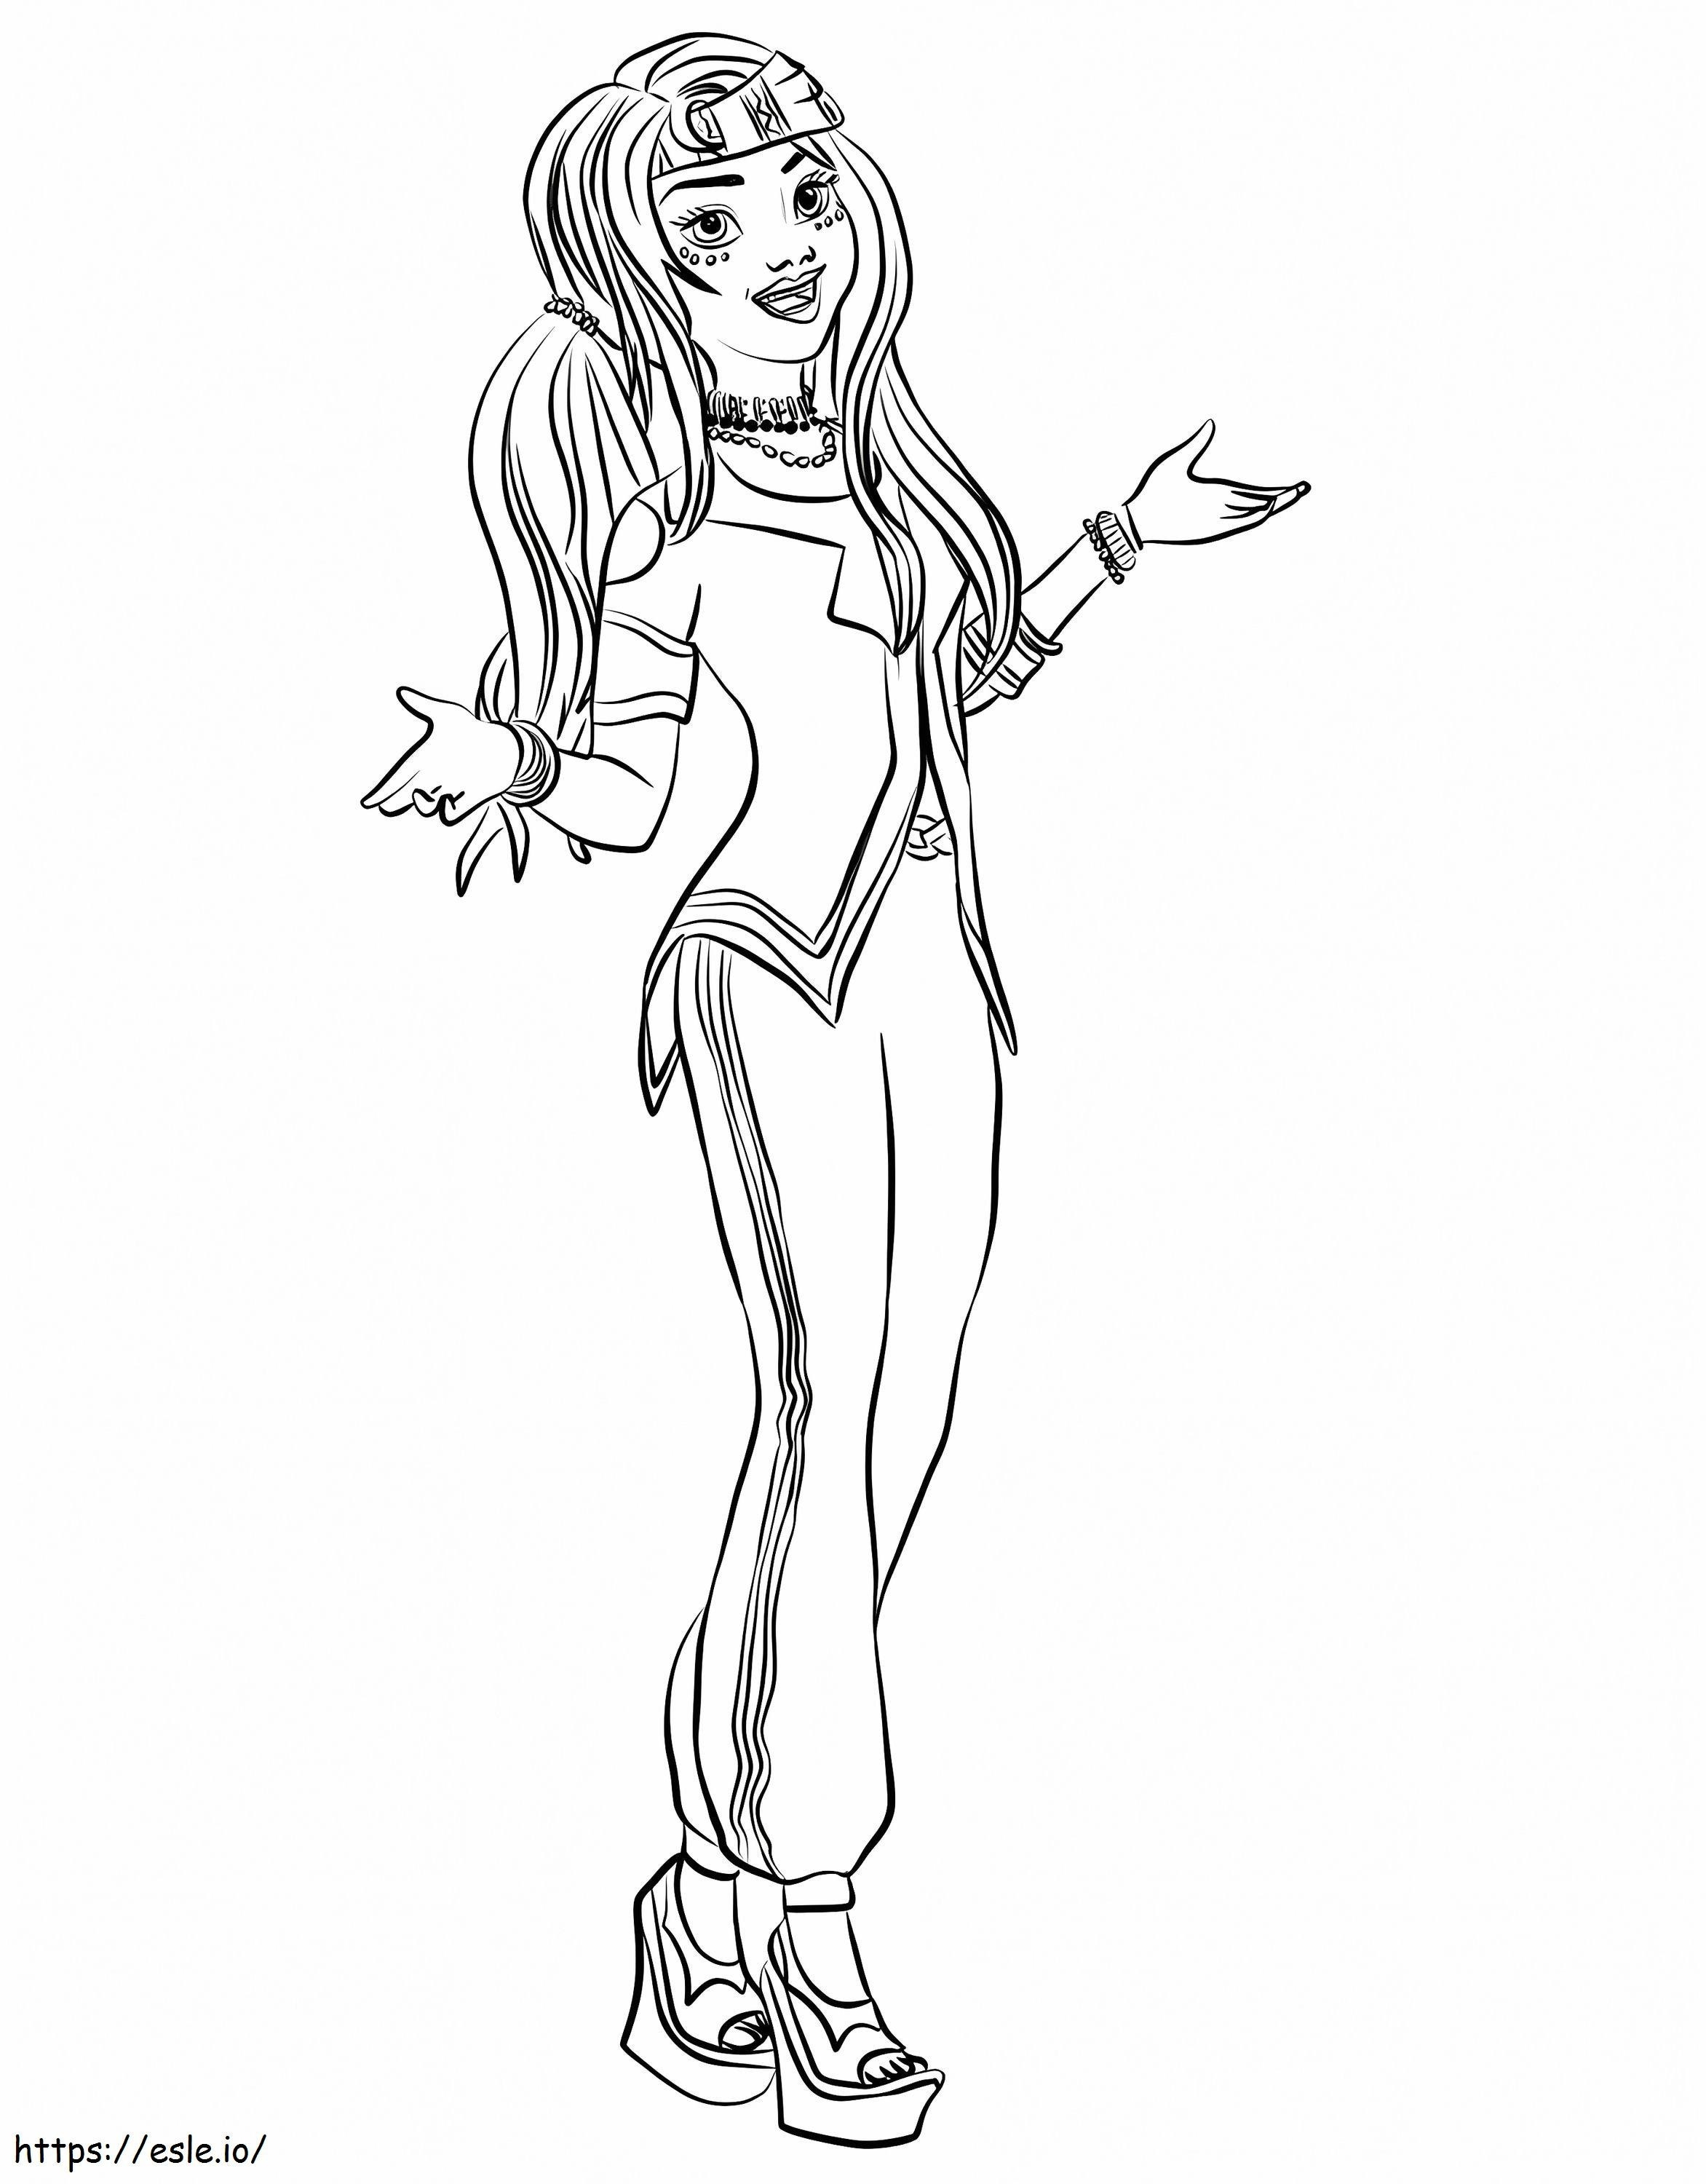 Descendants Wicked World Genie Chic Freddie coloring page